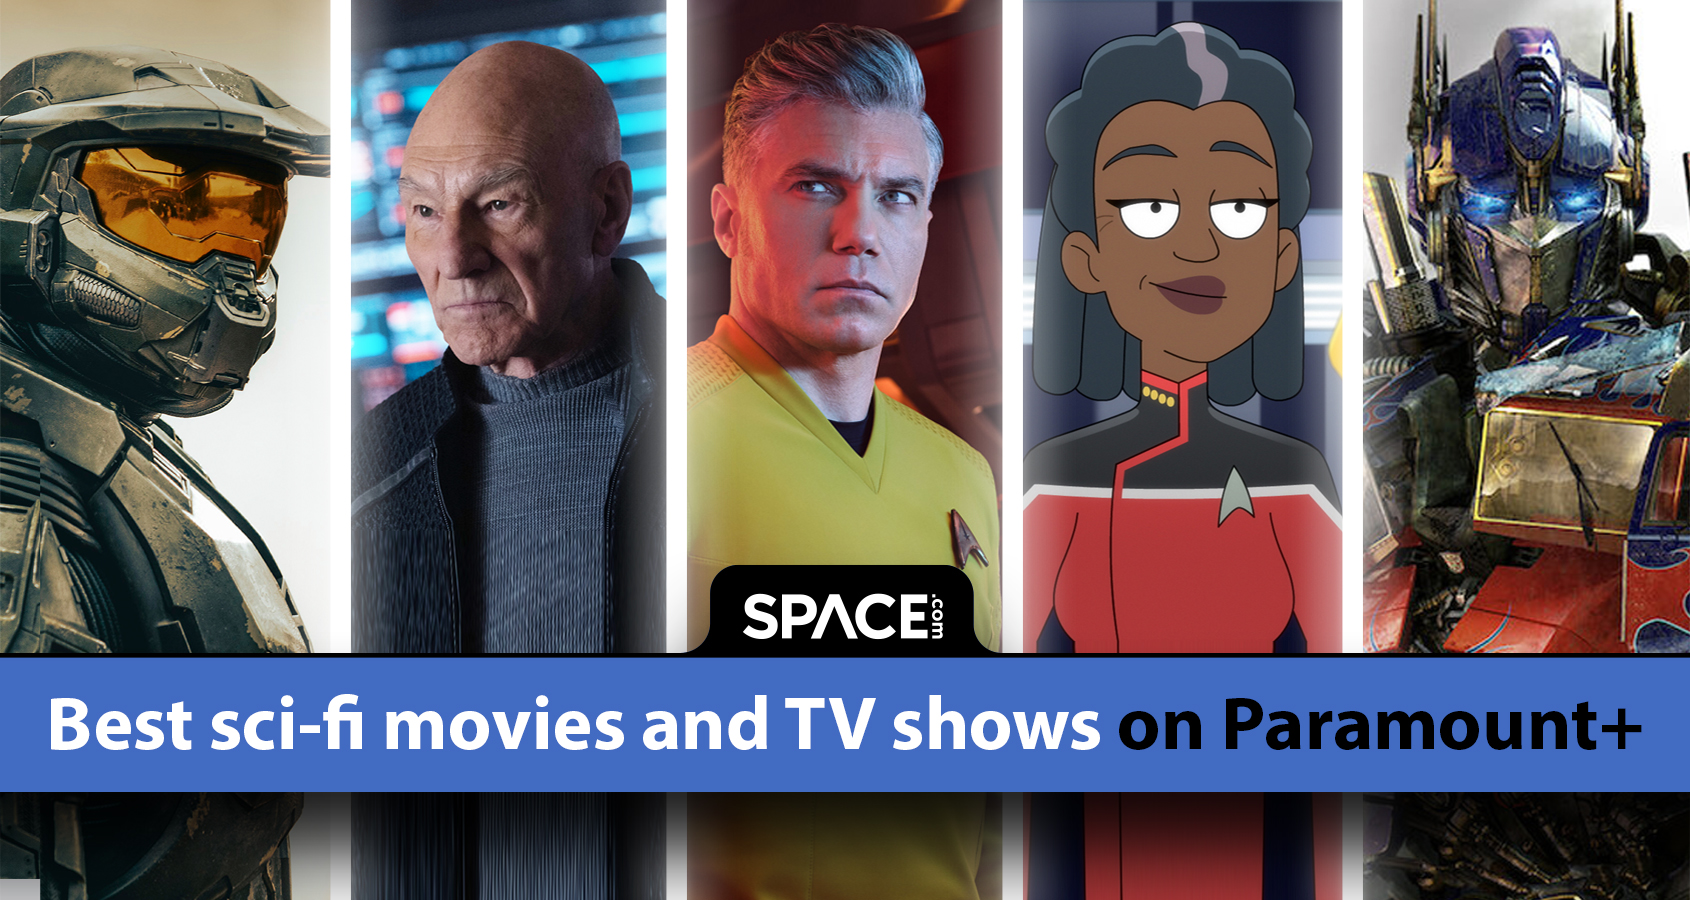  The best sci-fi movies and TV shows on Paramount Plus in March 